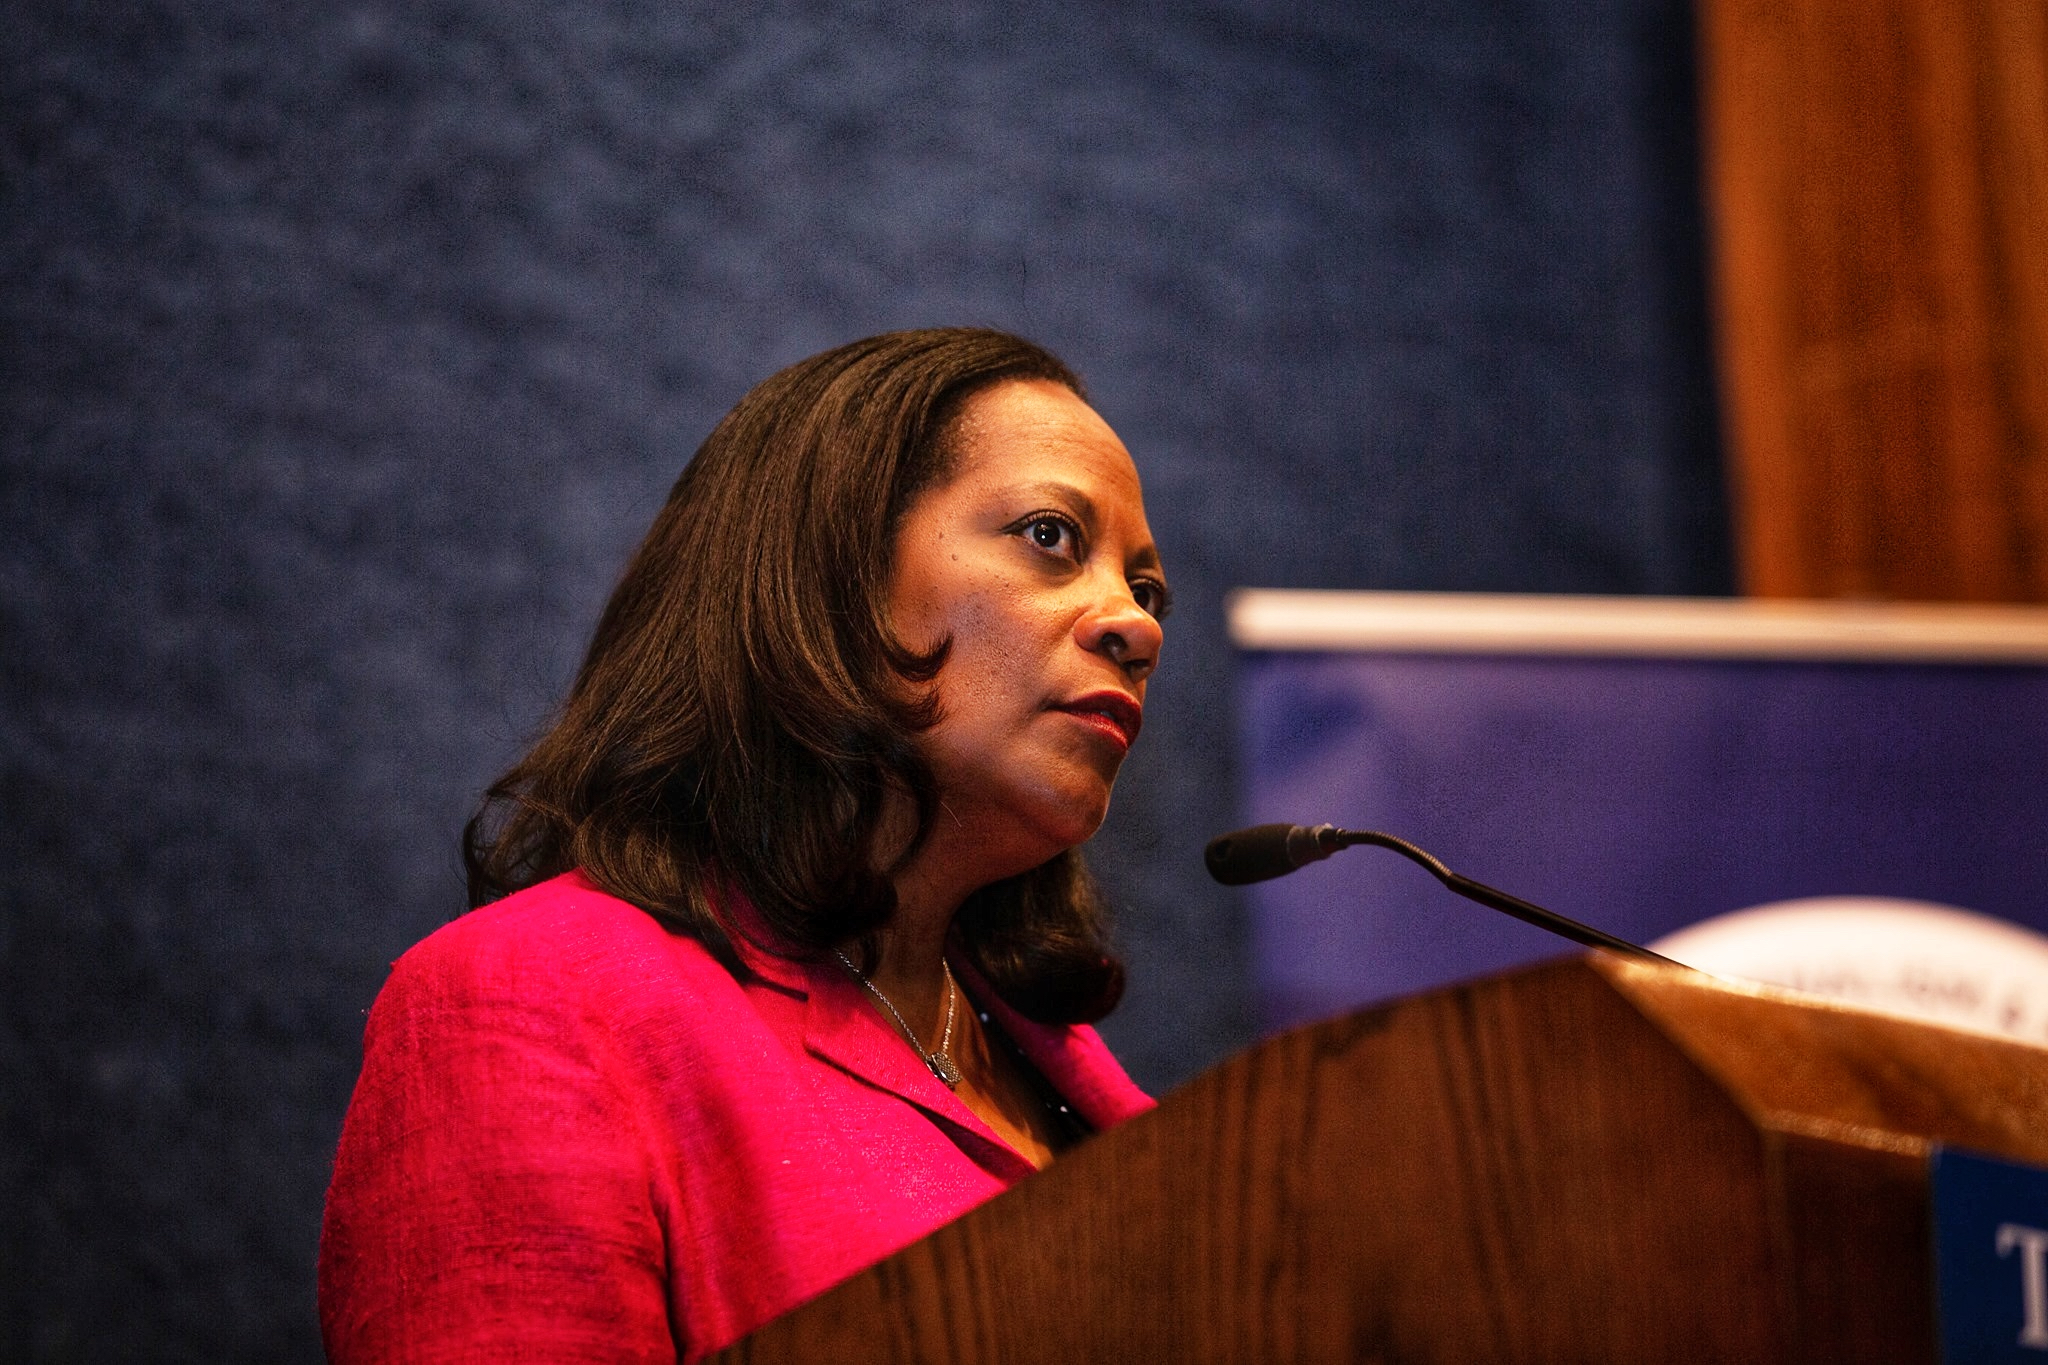 Alison Bethel speaking at the National Press Club (Credit: Report for America)